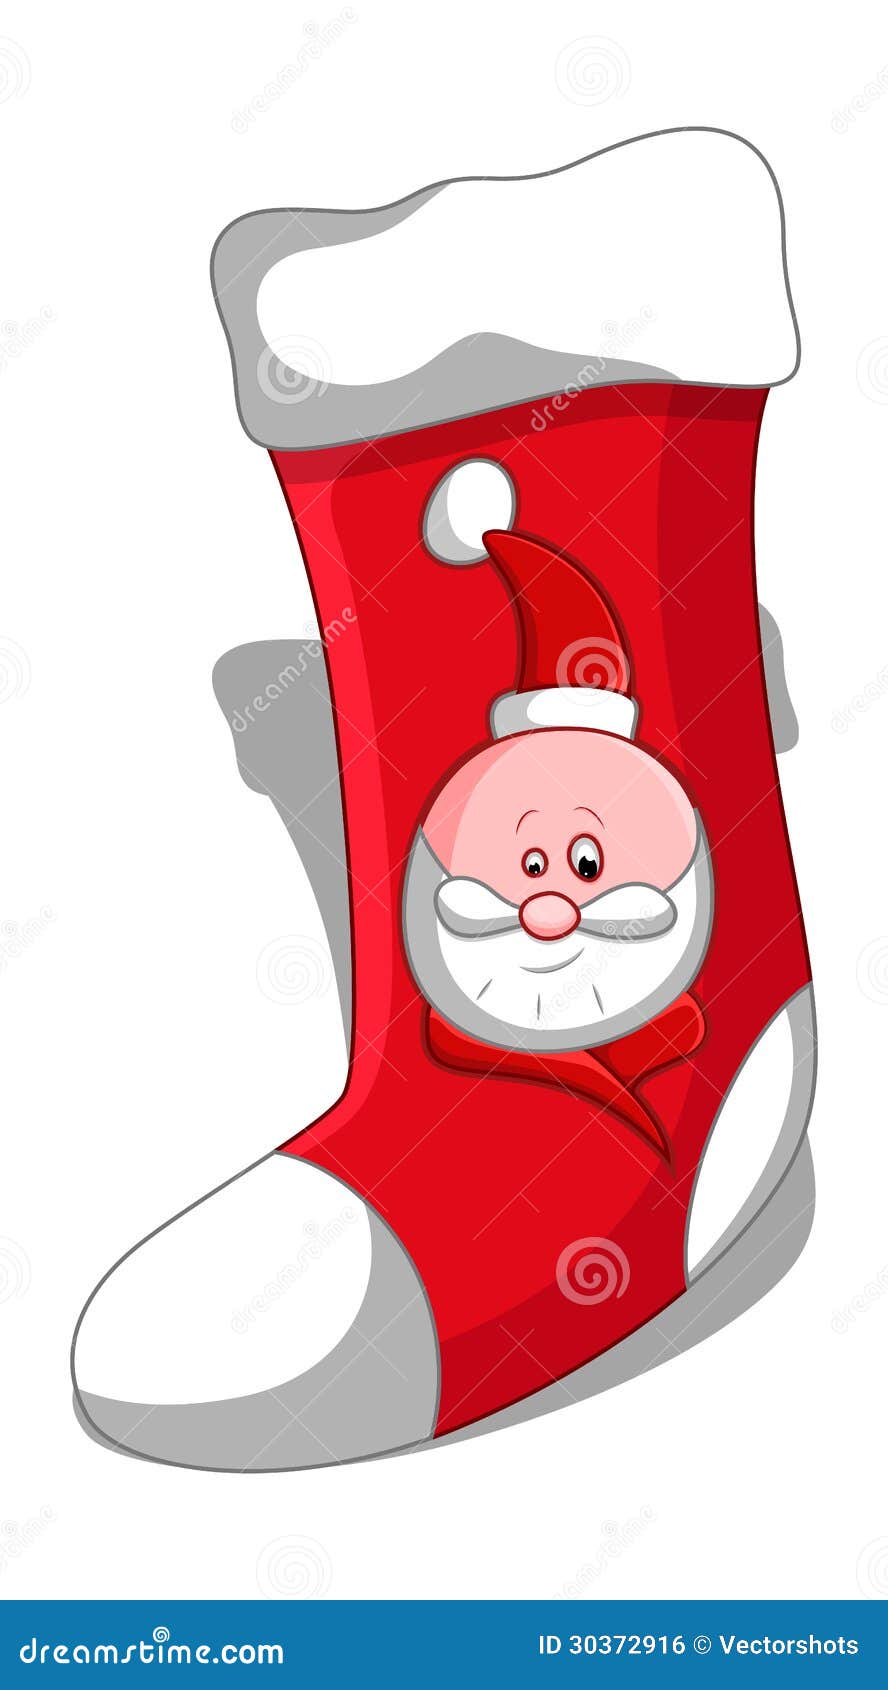 Christmas Socks Or Stockings One Line Drawing Vector Illustration Stock  Illustration - Download Image Now - iStock